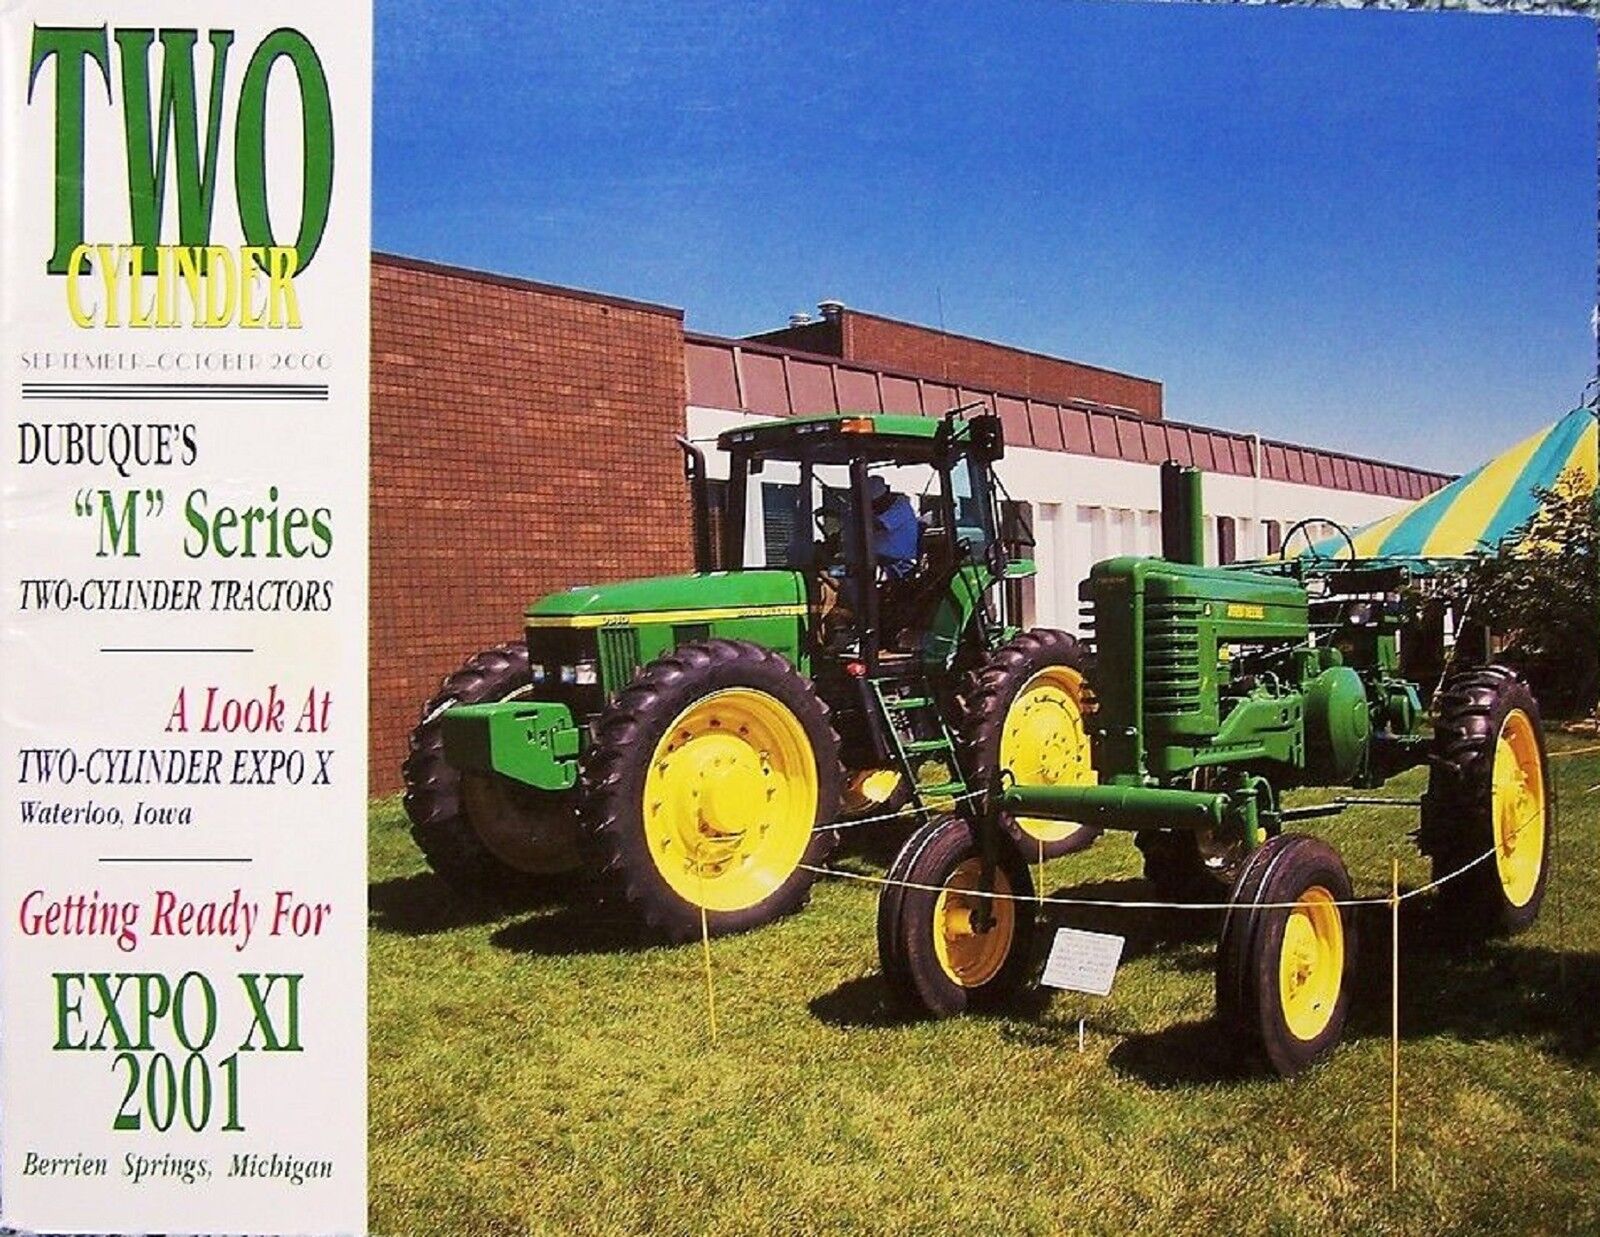 John Deere Model M Tractor Featured - Two Cylinder magazine